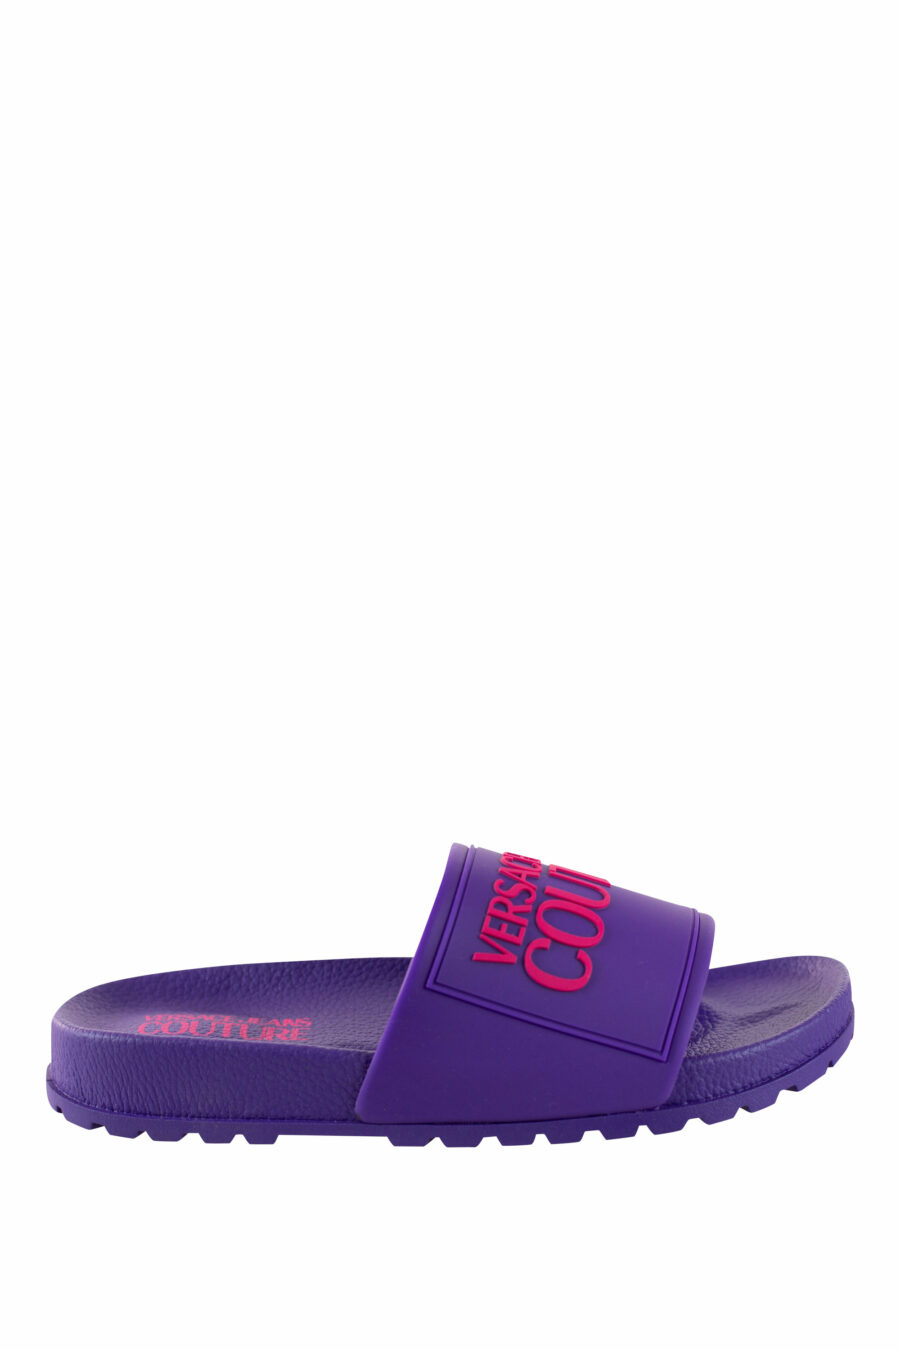 Purple flip-flops with logo and rough sole - IMG 4381